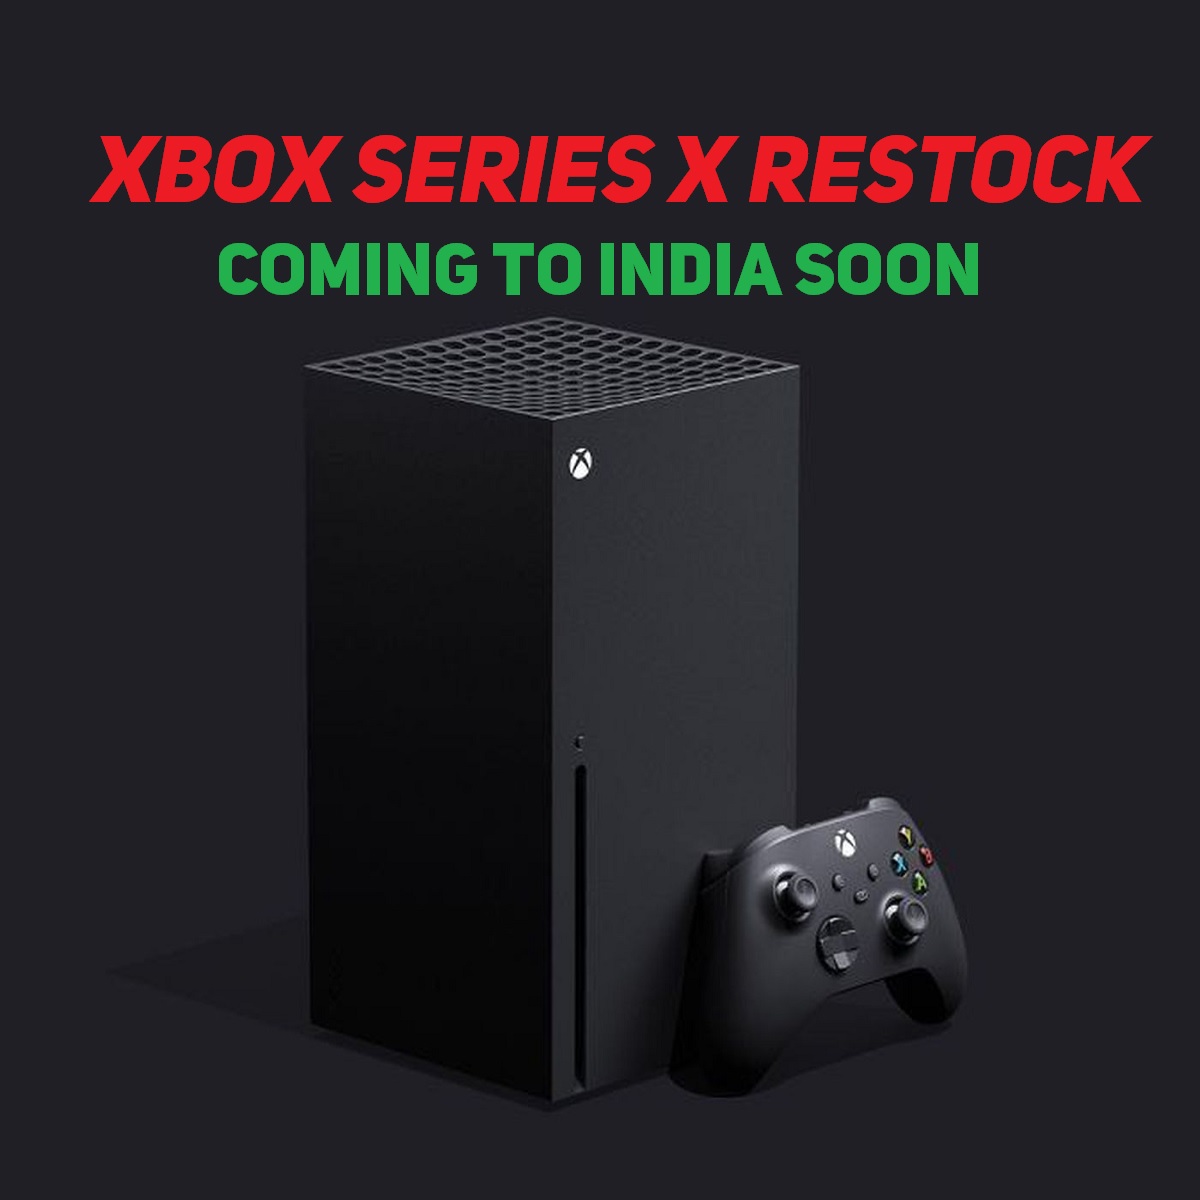 Xbox Series X restock coming to India very soon; will include Space Jam- A New Legacy controllers